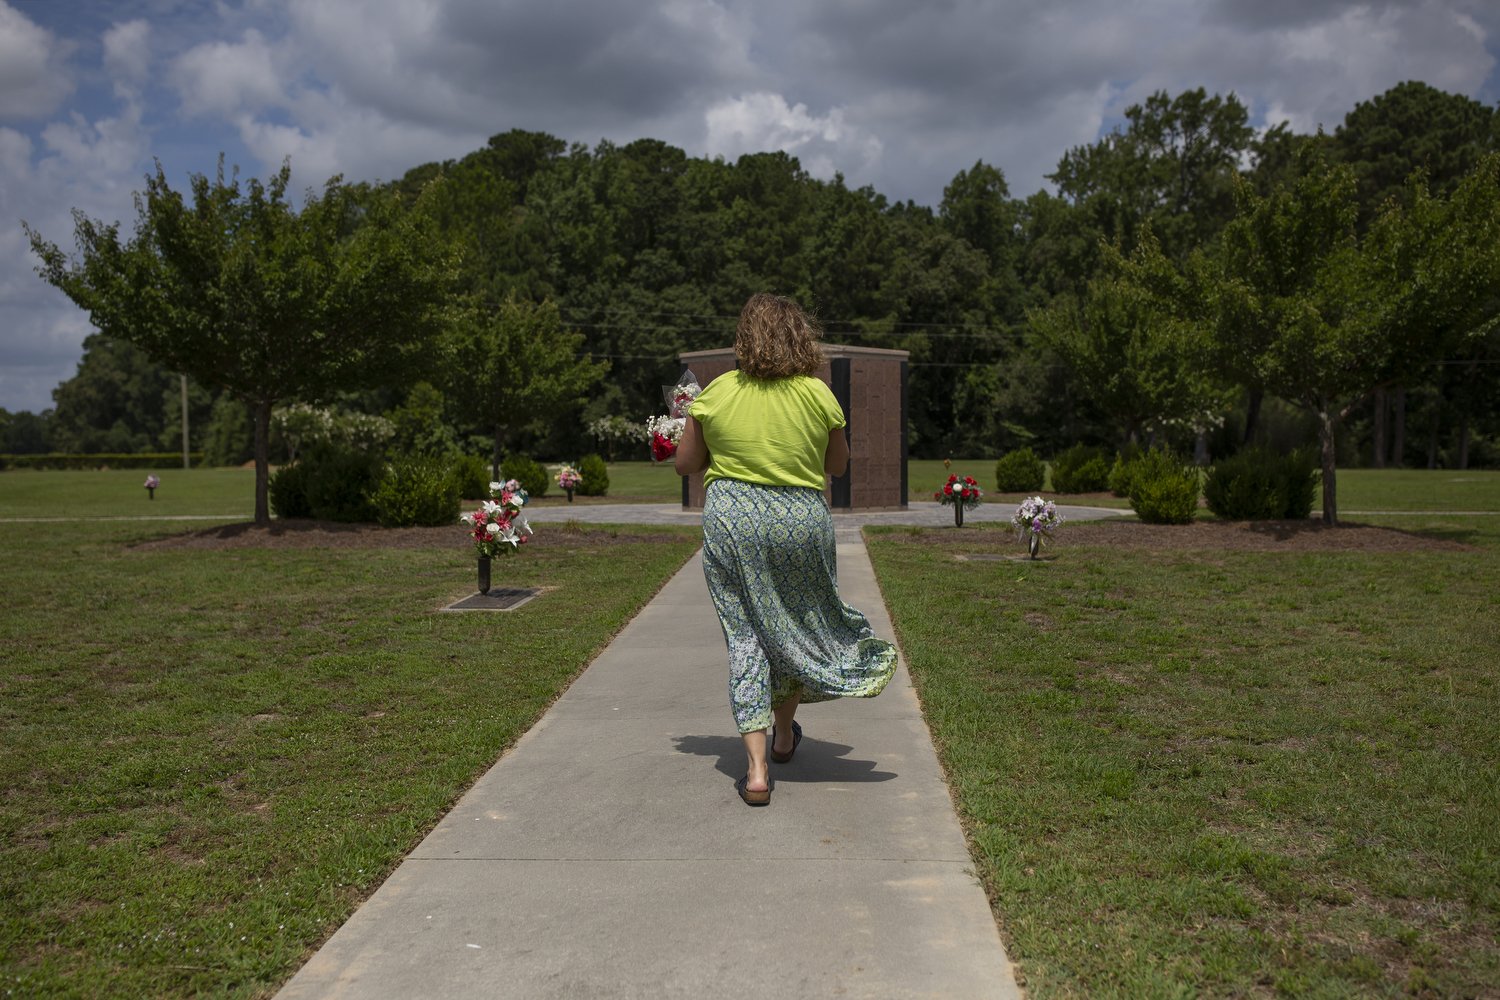  Fran Lunsford Laughinghouse walks up to the columbarium that holds both of her sons’ ashes at the Pinewood Memorial Park in Greenville, North Carolina. Jackson and Alex Laughinghouse both died of opioid overdose. Fran felt that it was important to h